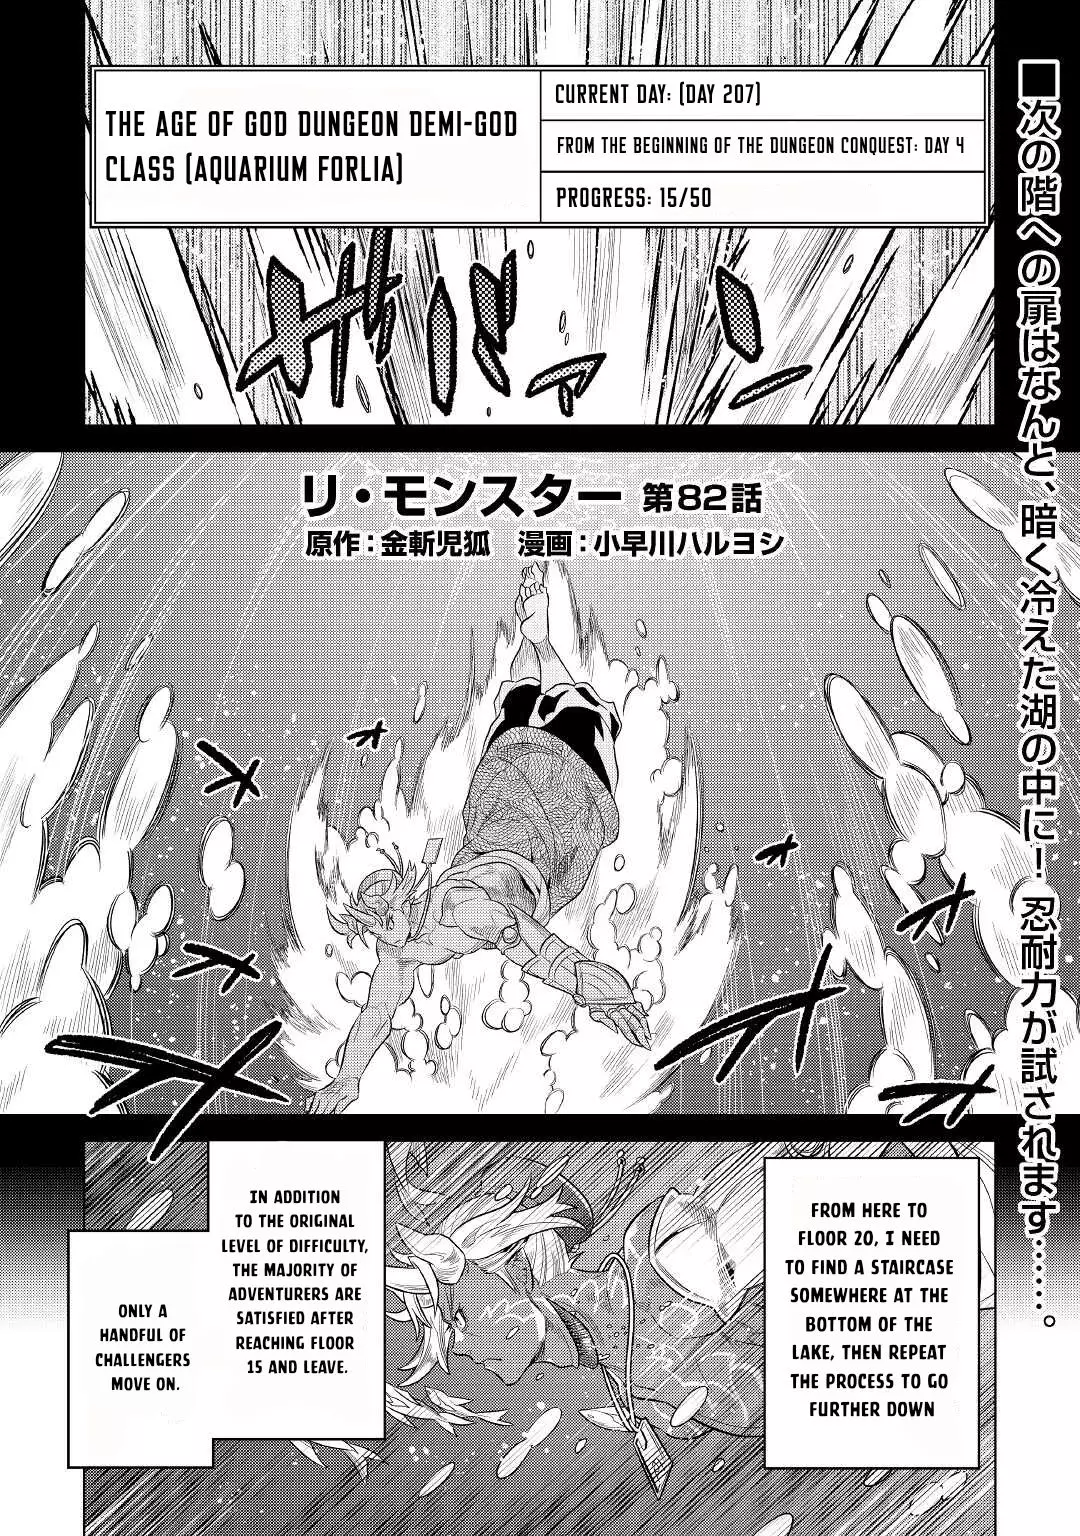 Re:Monster - 82 page 1-91217f9c